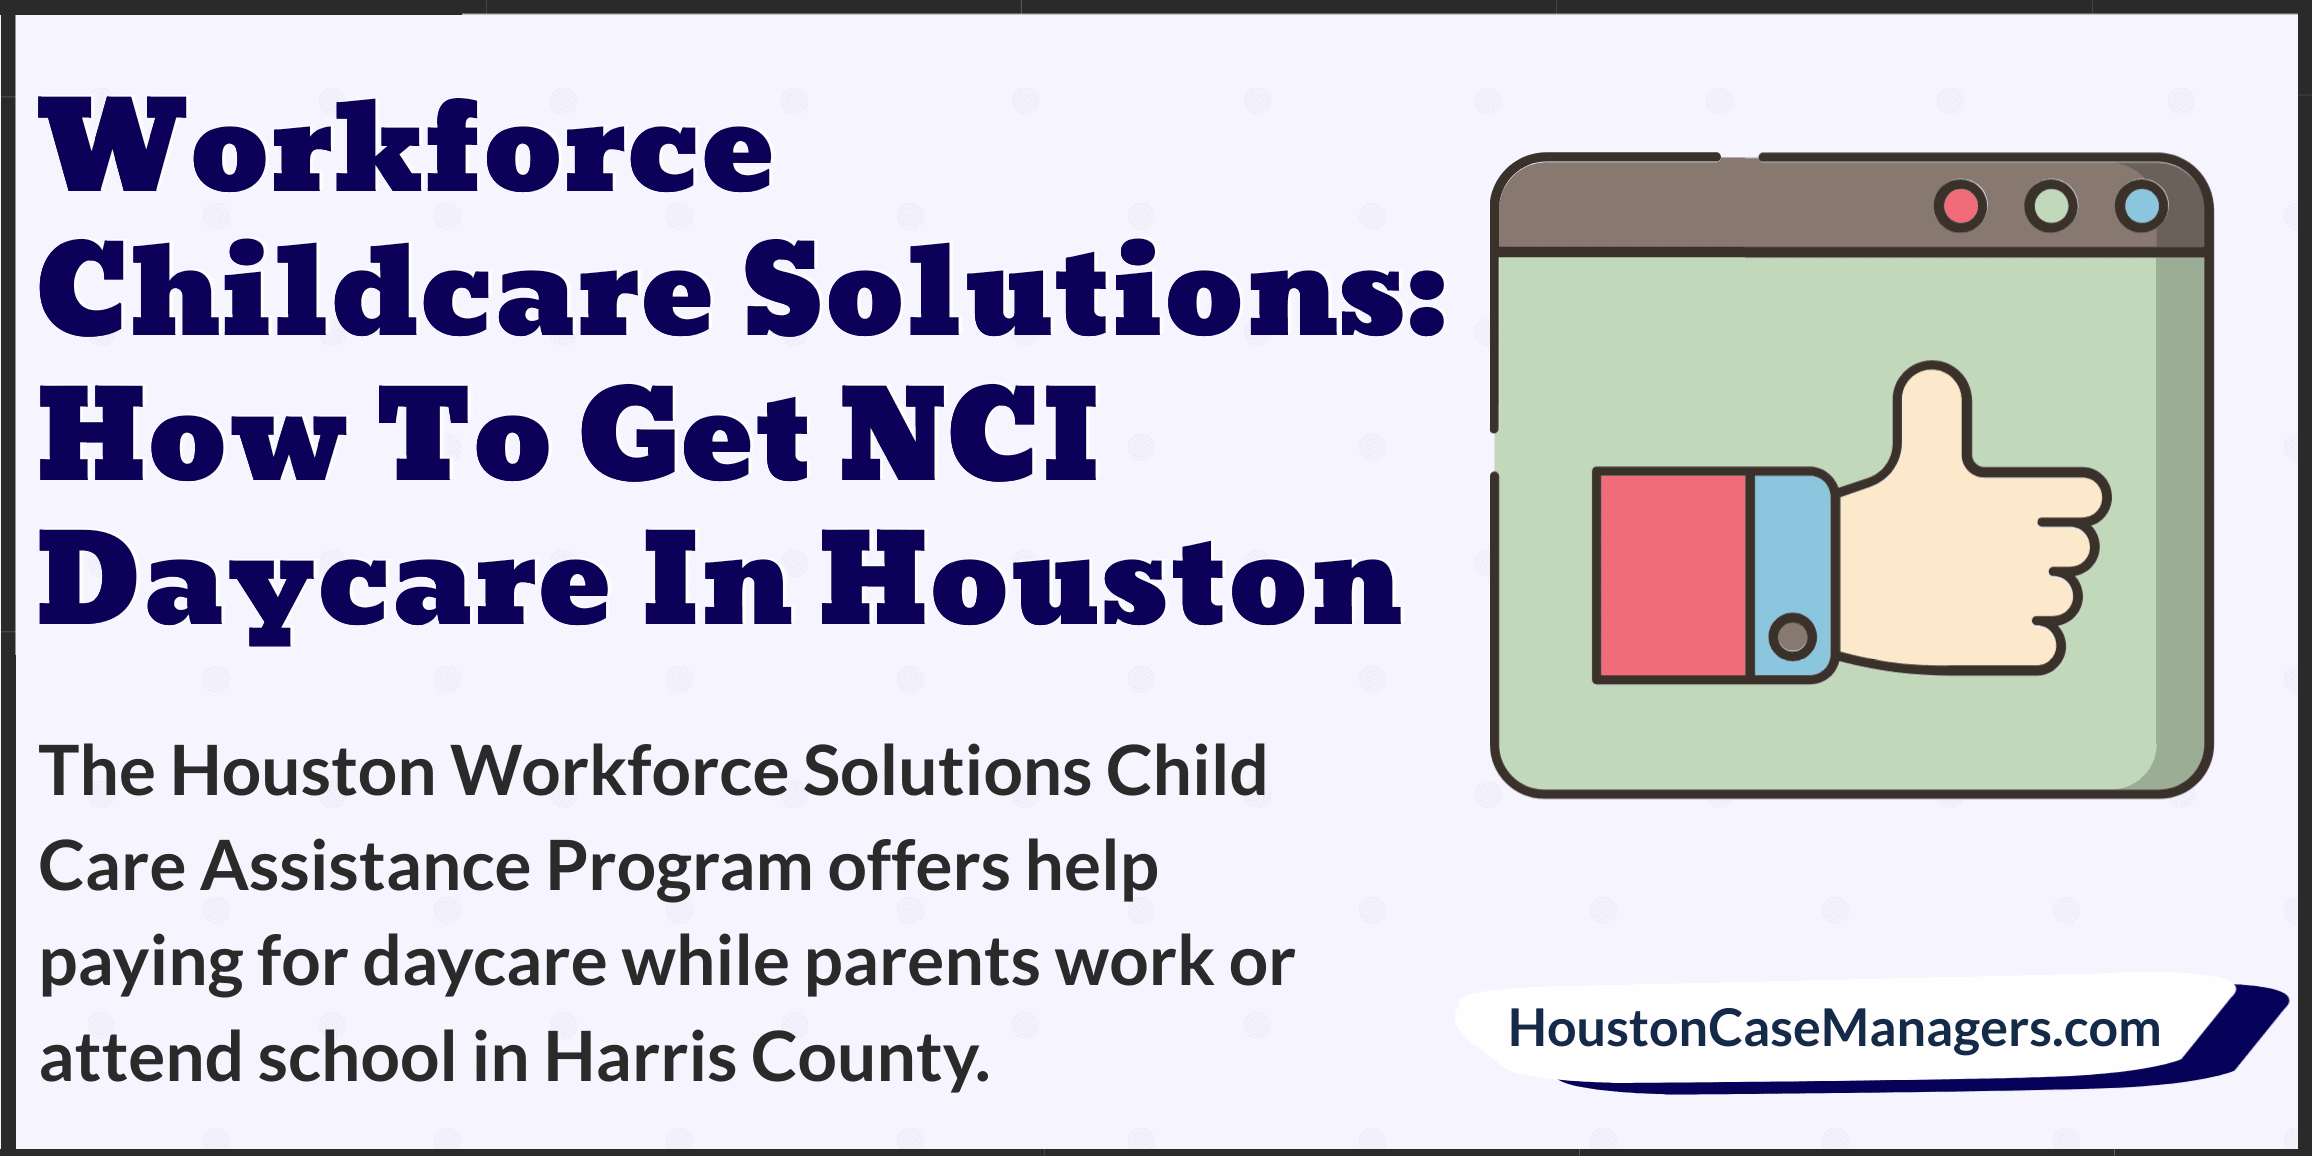 Workforce Childcare Solutions Houston